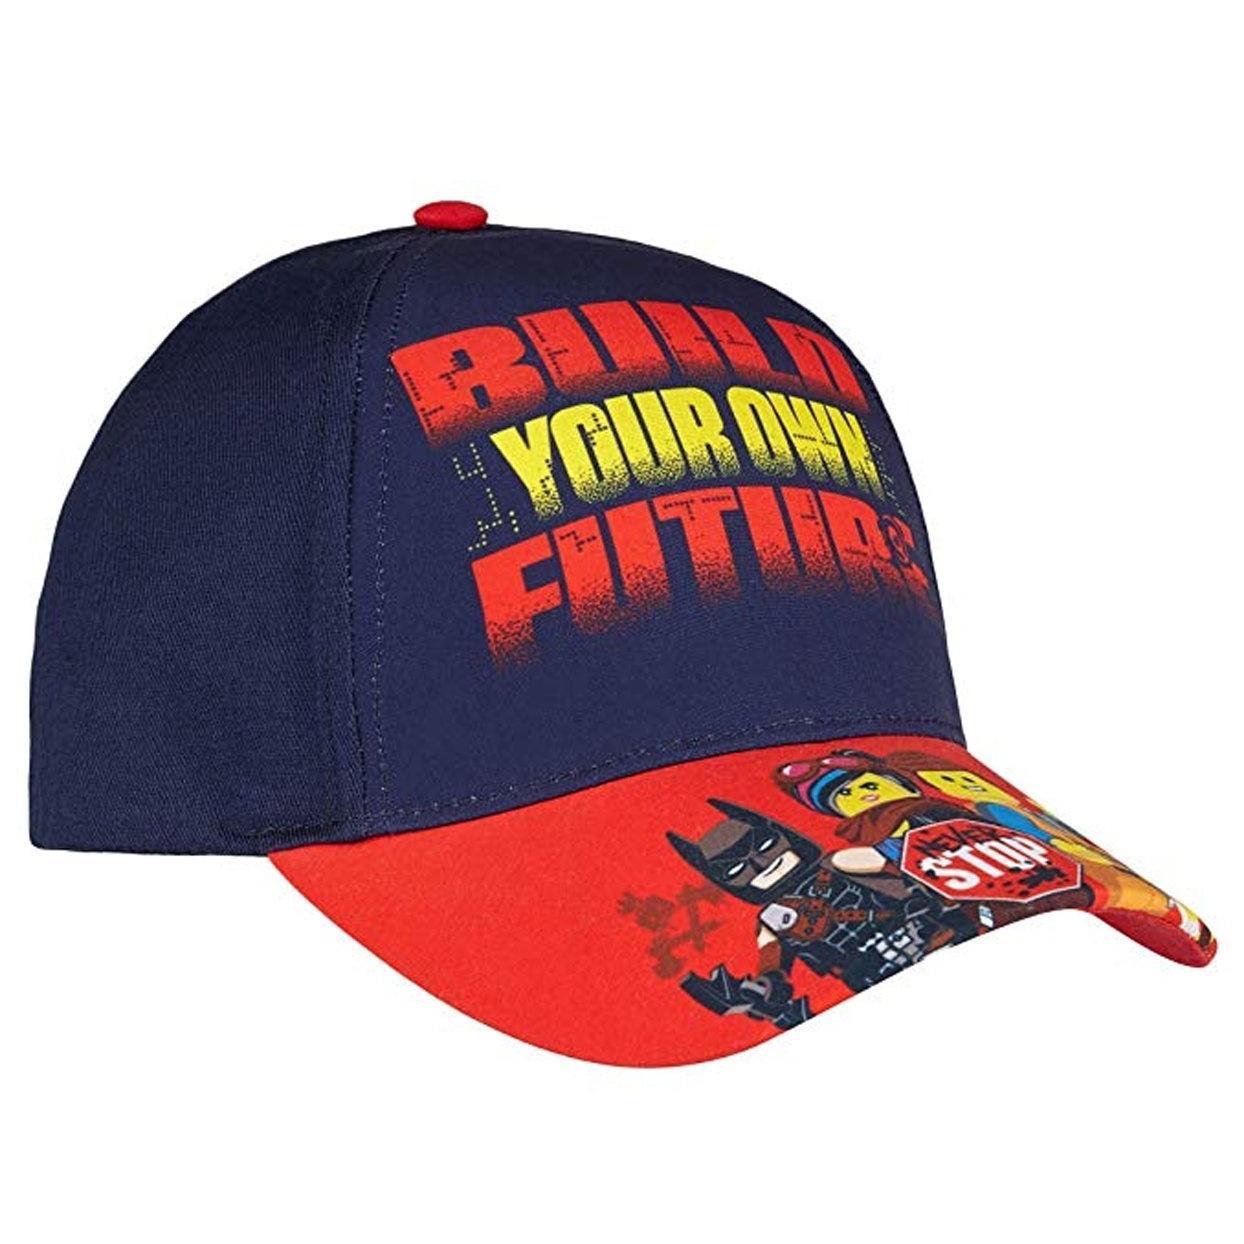 Lego Movie 2 Kids/Childrens Characters Cap (Navy/Red) (52cm)